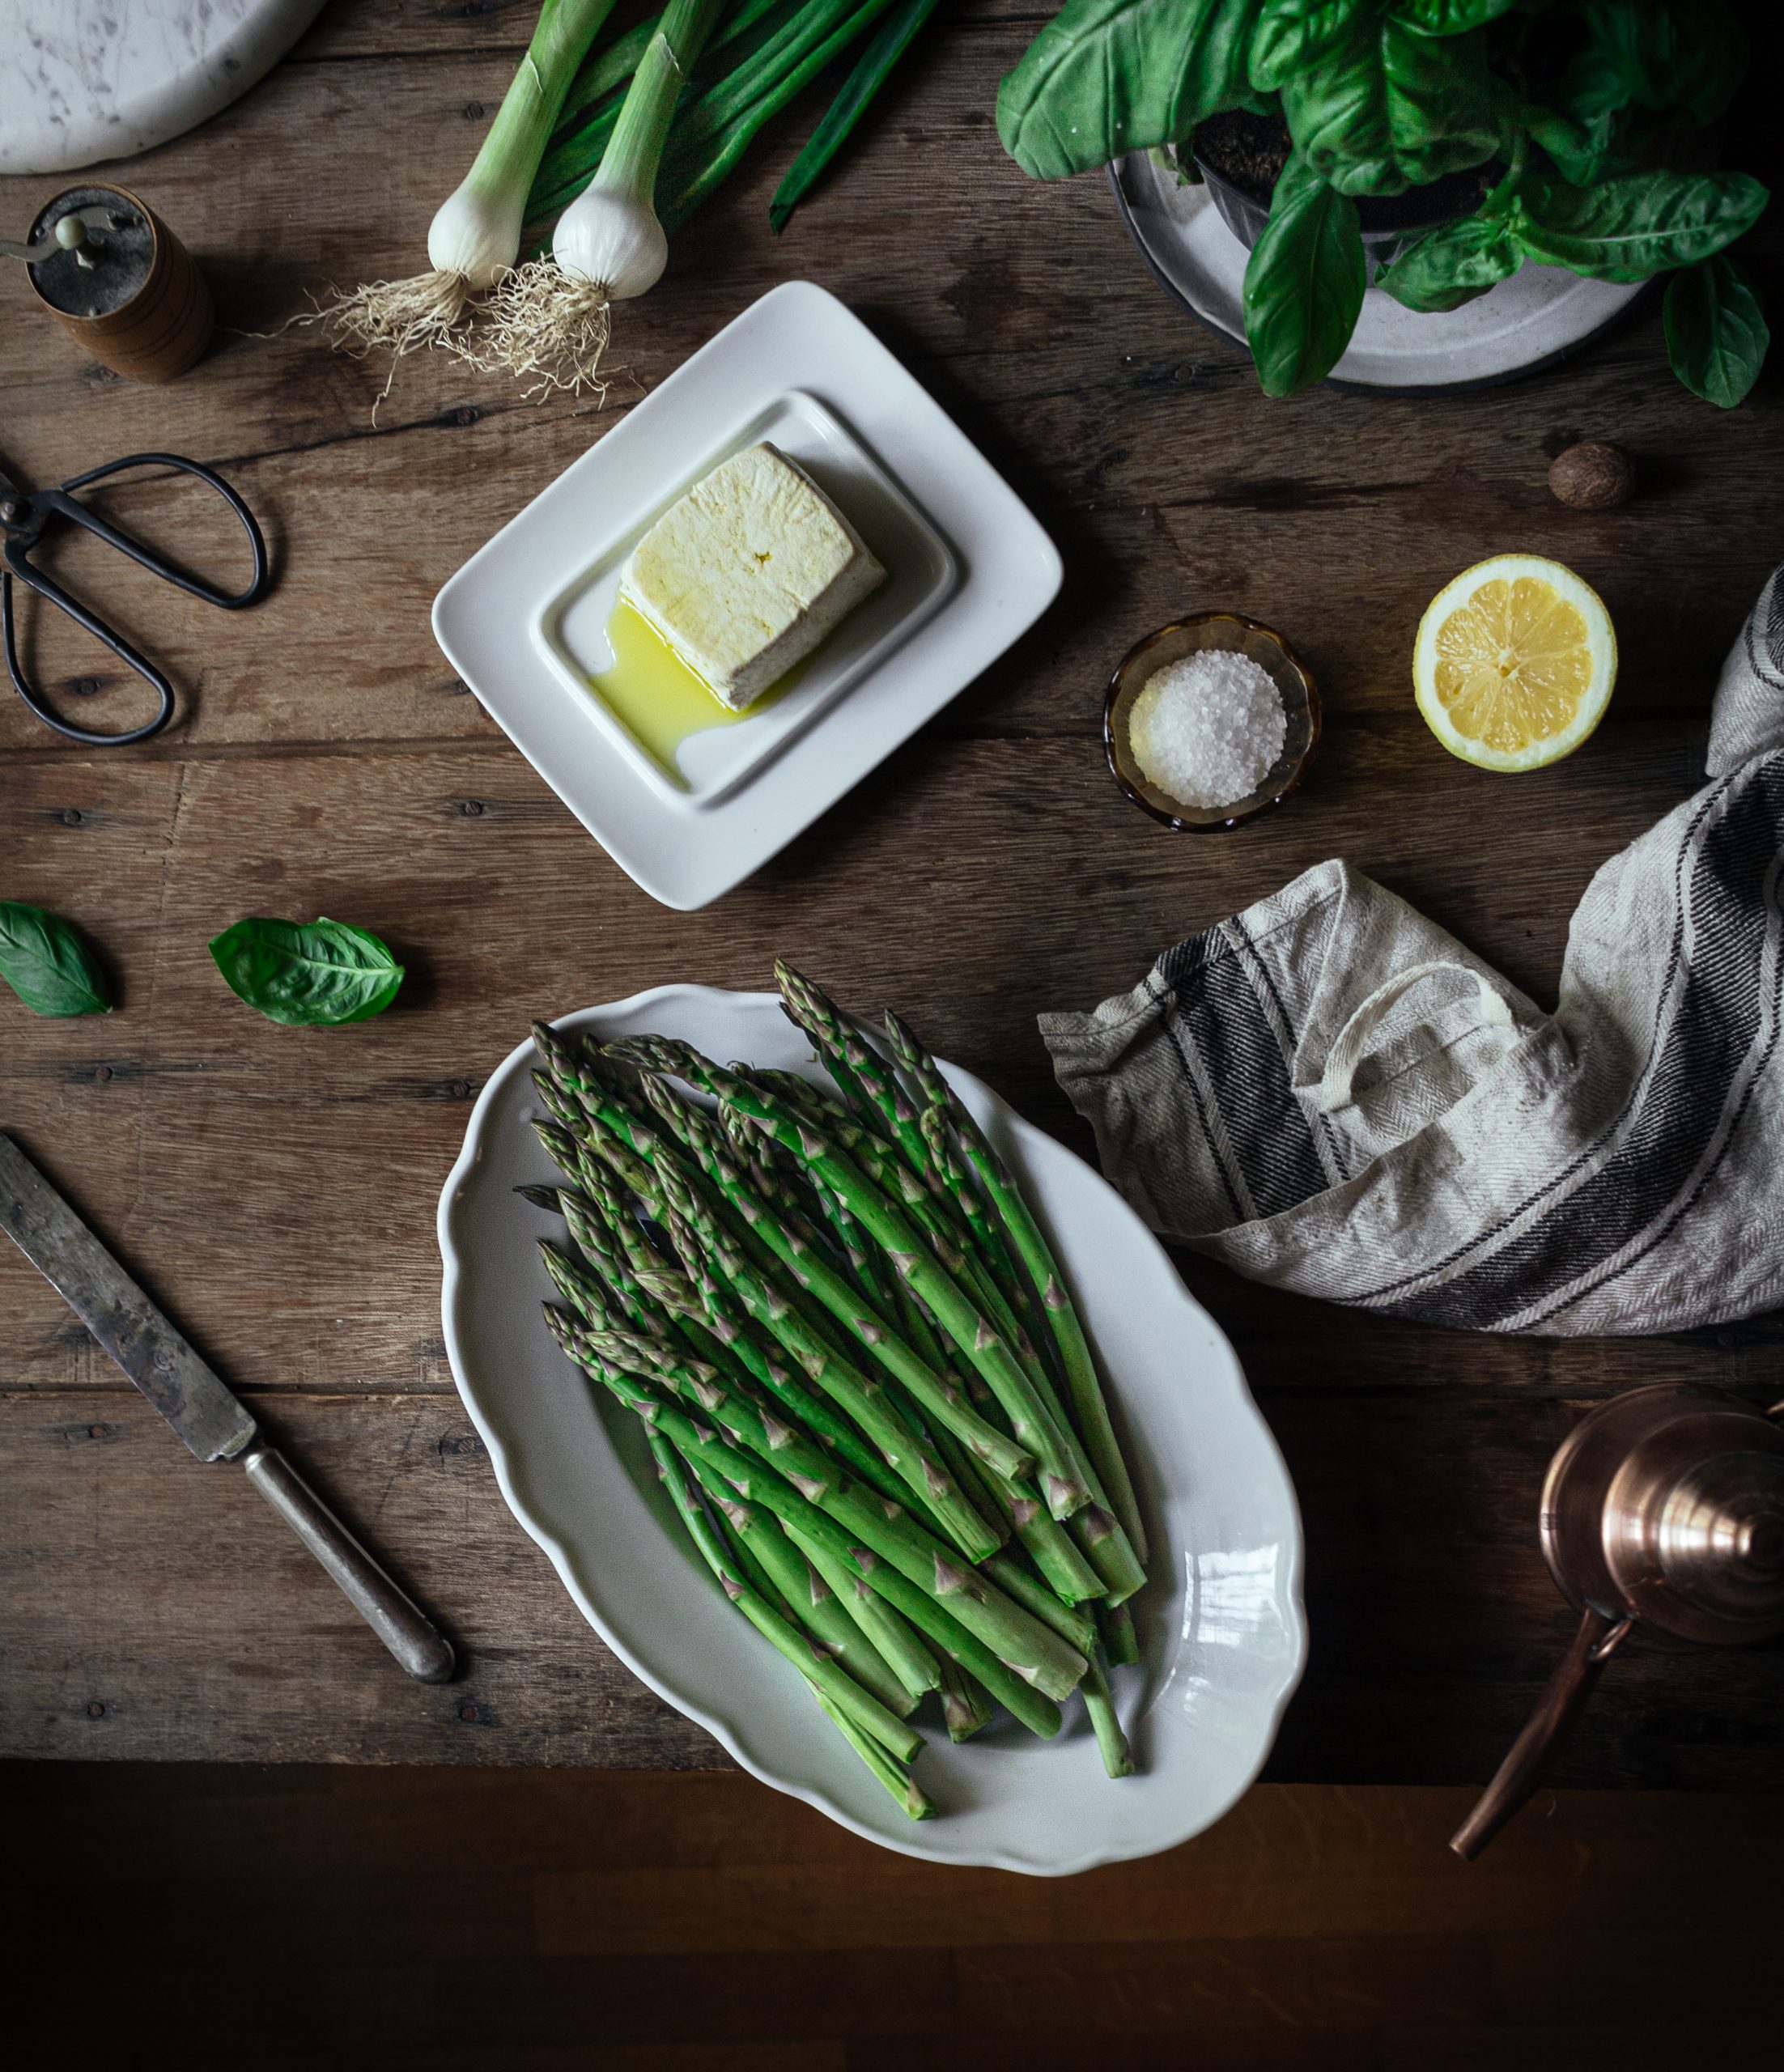 SIMPLE ASPARAGUS TART WITH PUFF PASTRY (VEGAN)